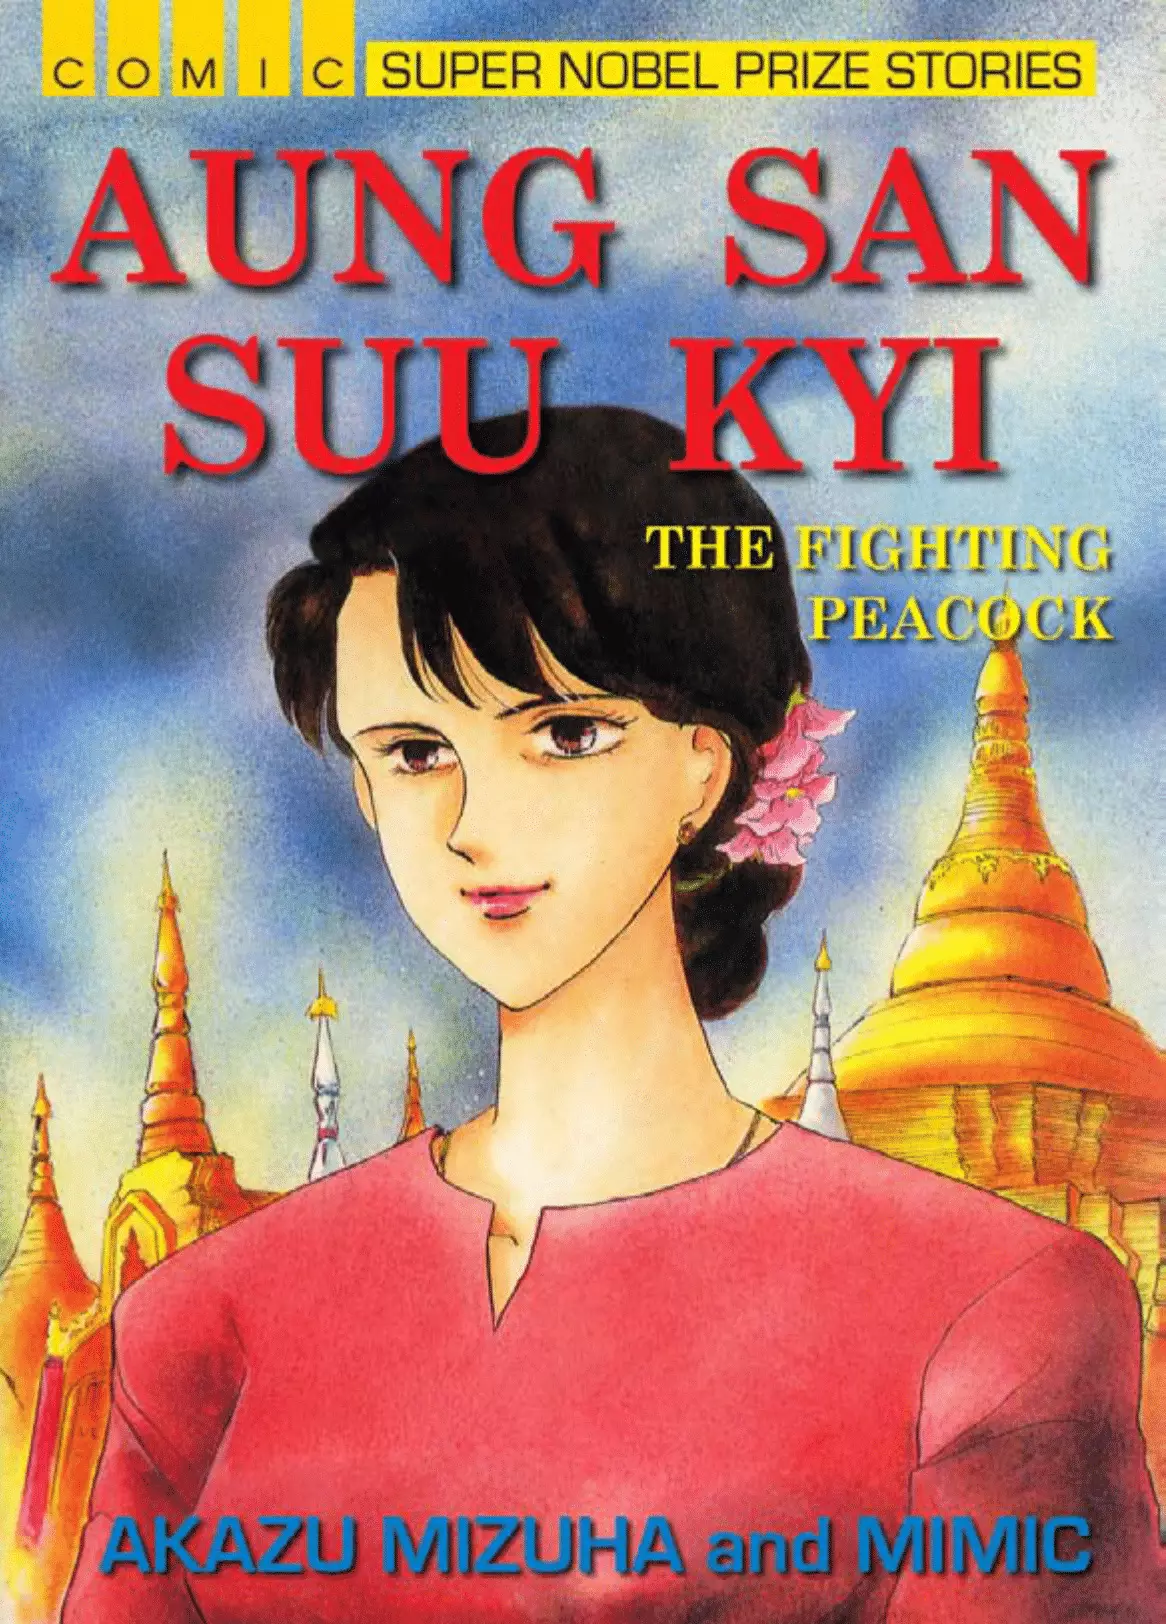 Aung San Suu Kyi: The Fighting Peacock - 1 page 1-86a06fcf